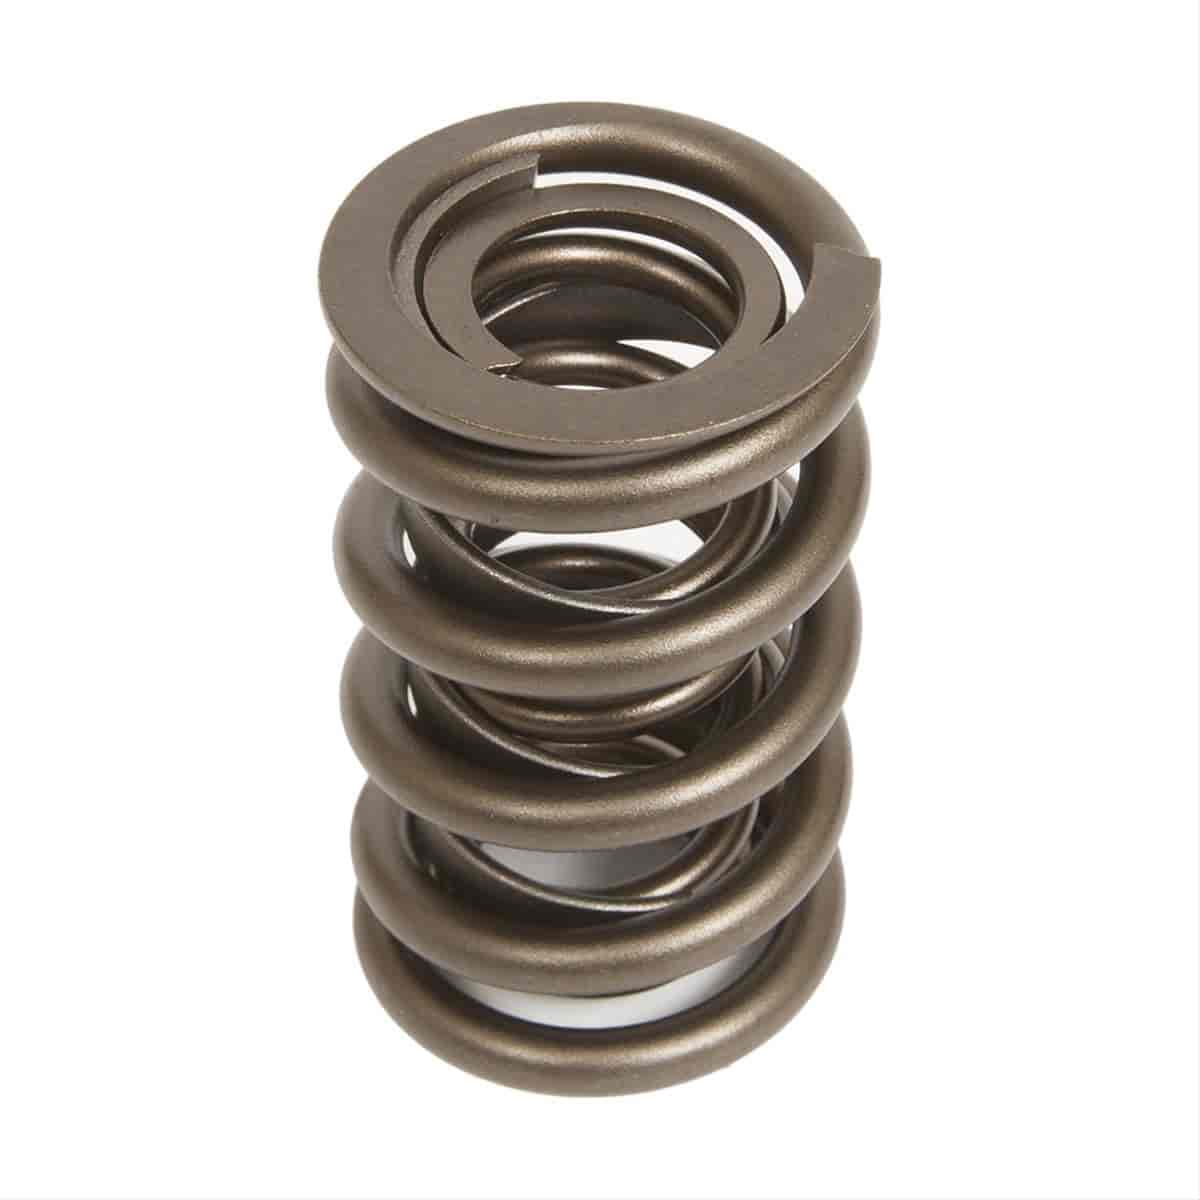 Dual Valve Spring for Big Block Chevy, Outside Diameter: 1.550"